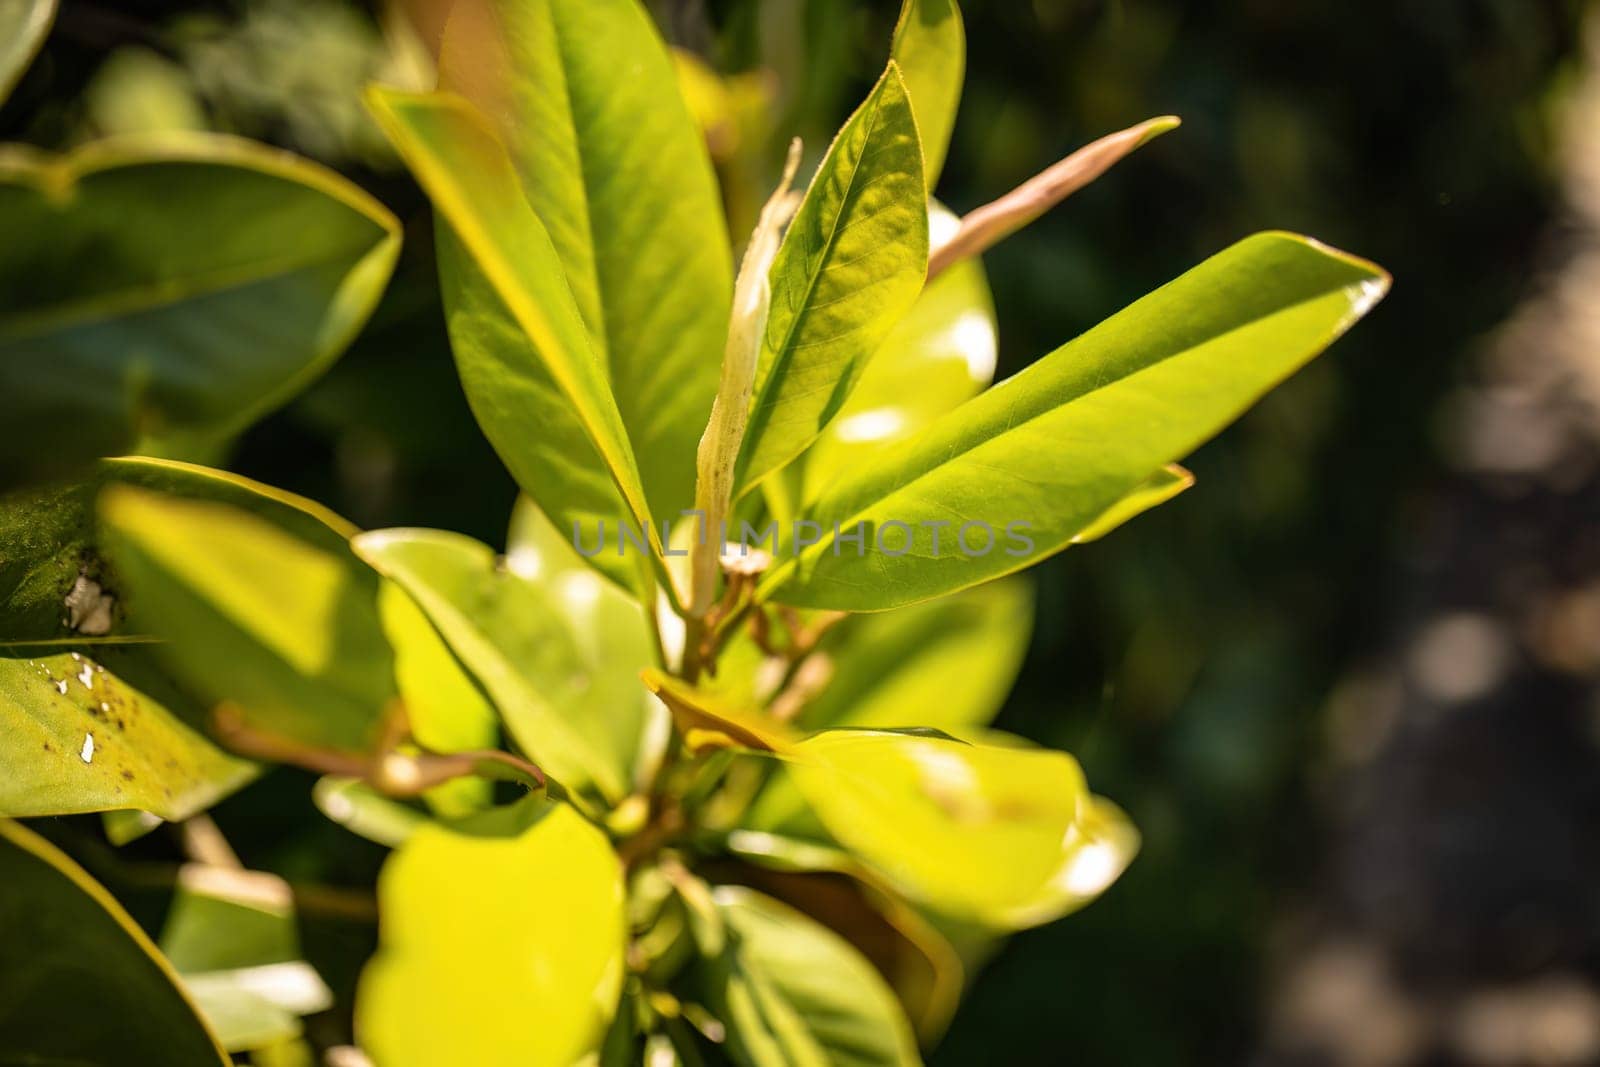 Detailed close-up view of a lush green leafy tree, showcasing the intricate patterns and textures of the leaves.